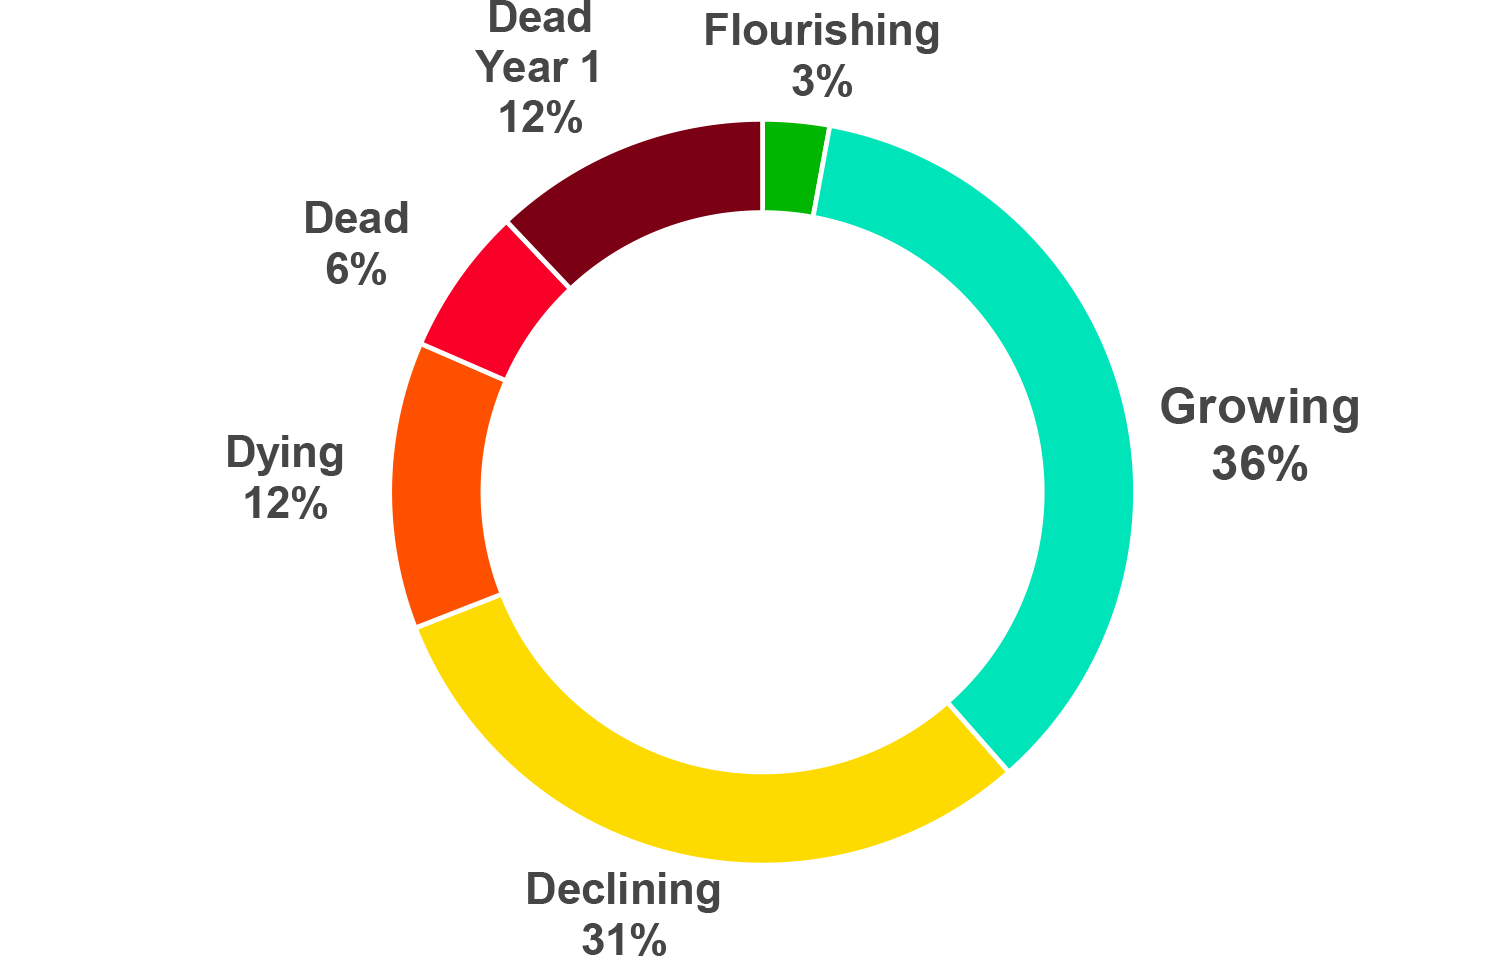 Chart 1: A donut chart showing survival rates for new product developments with only 3% flourishing while 12% die in Year 1.